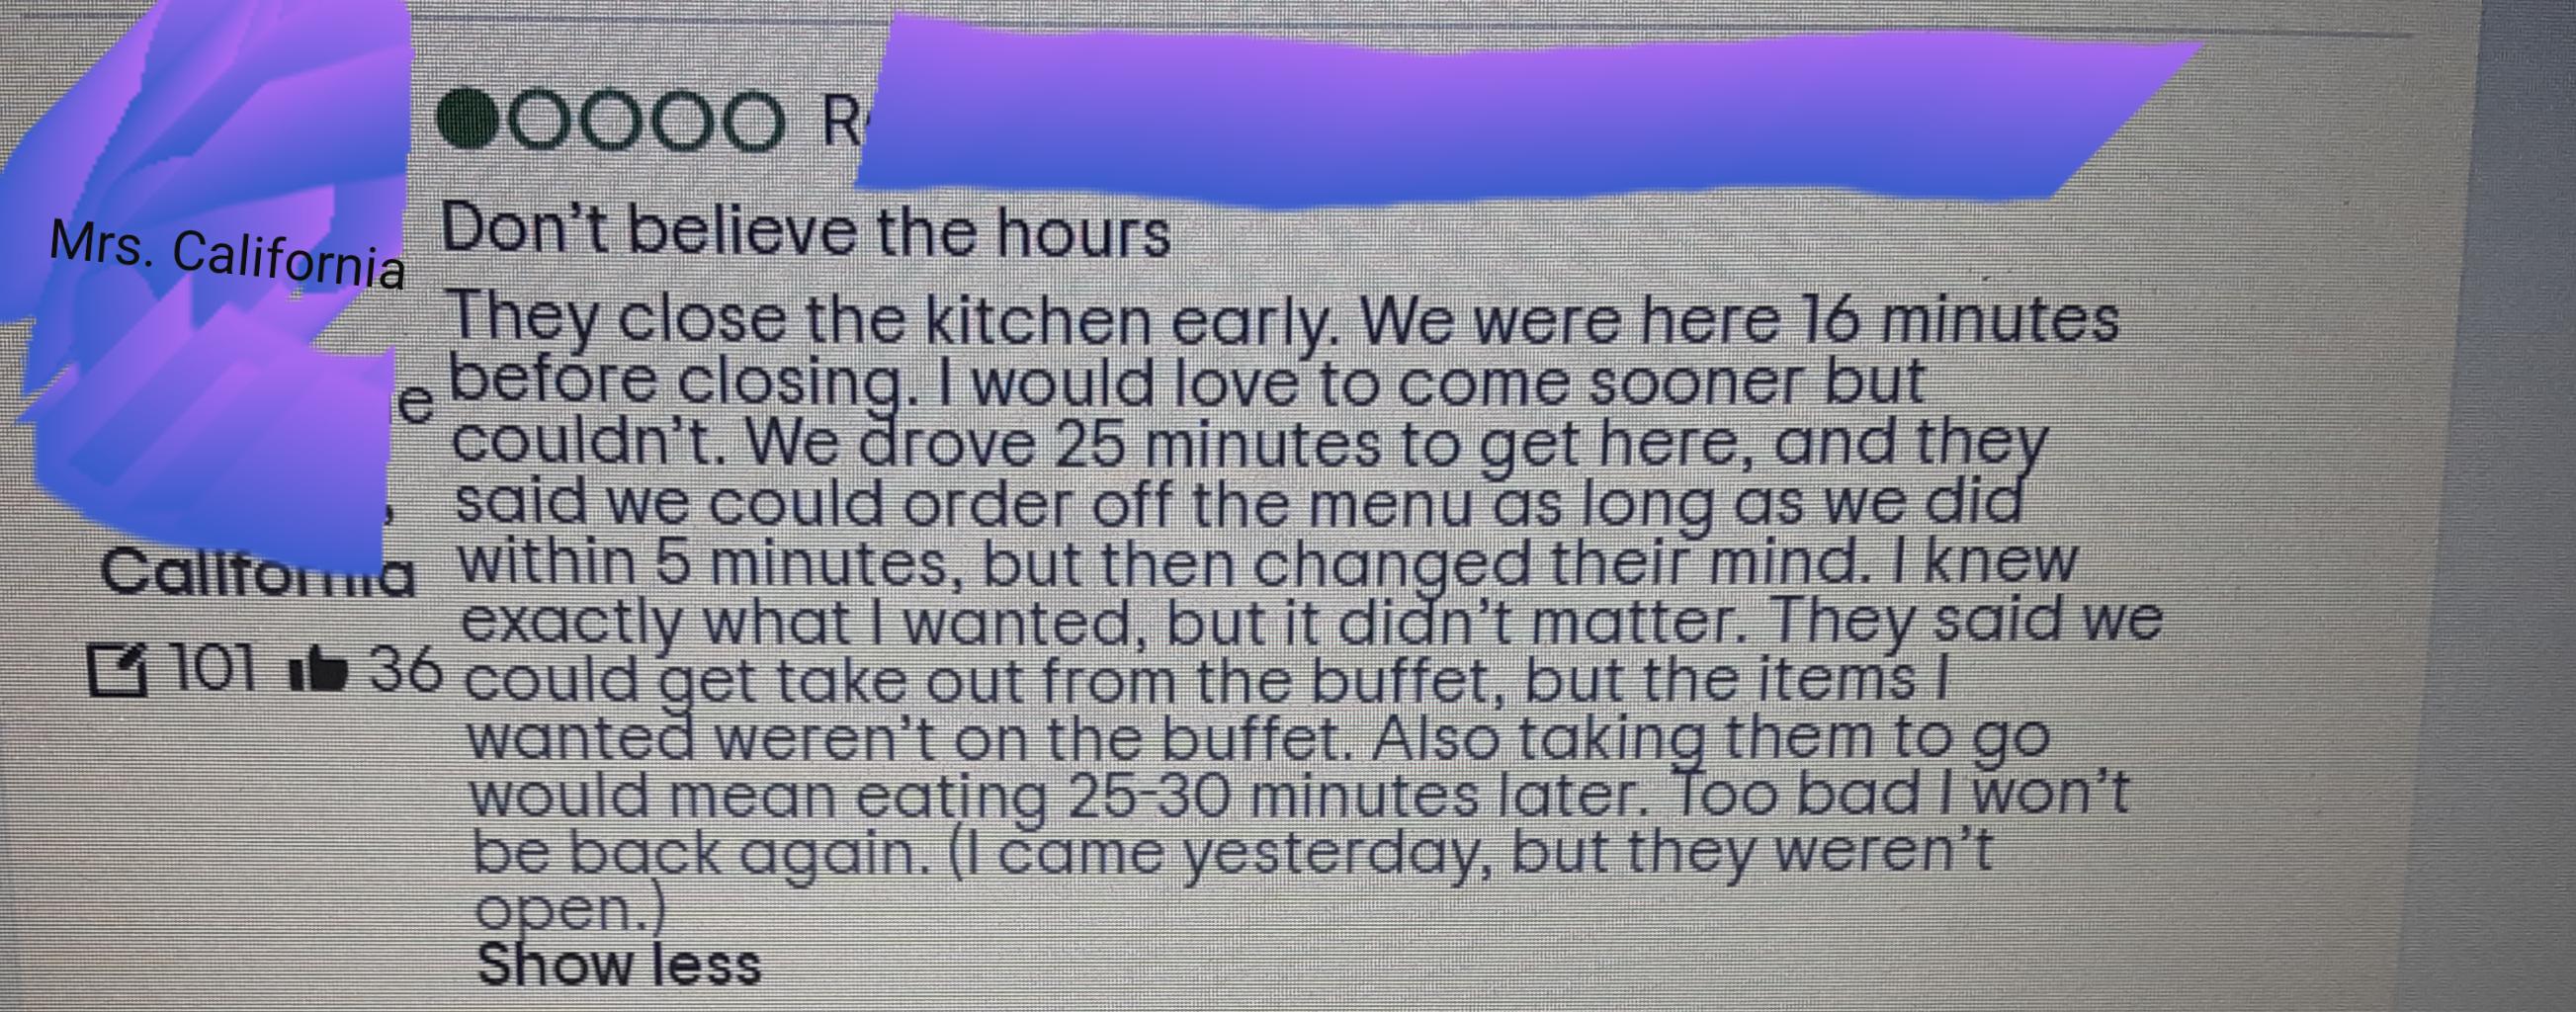 document - Mrs. California 000OOR Don't believe the hours "They close the kitchen early. We were here 16 minutes e before closing. I would love to come sooner but couldn't. We drove 25 minutes to get here, and they said we could order off the menu as long